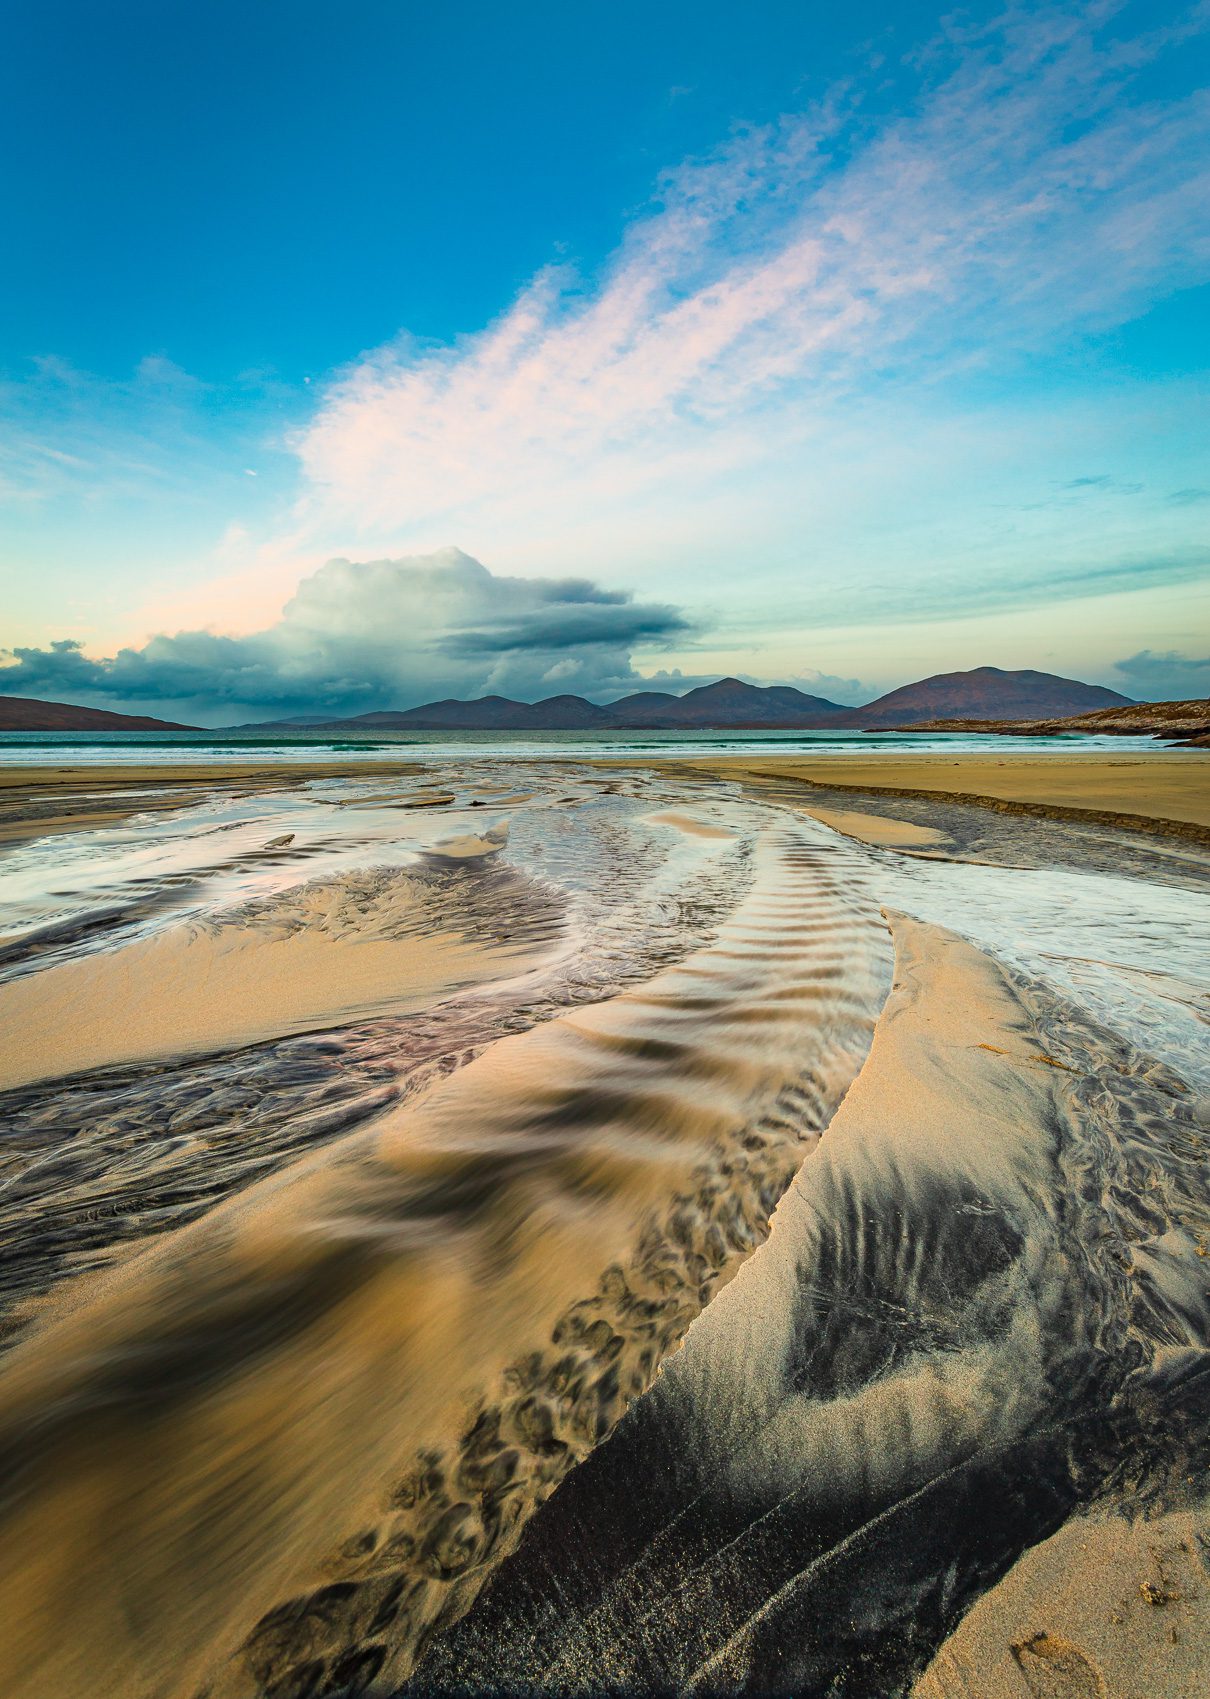 Sand and water patterns at Luskentyre, Isle of Harris, Outer Hebrides, Scotland. HB009